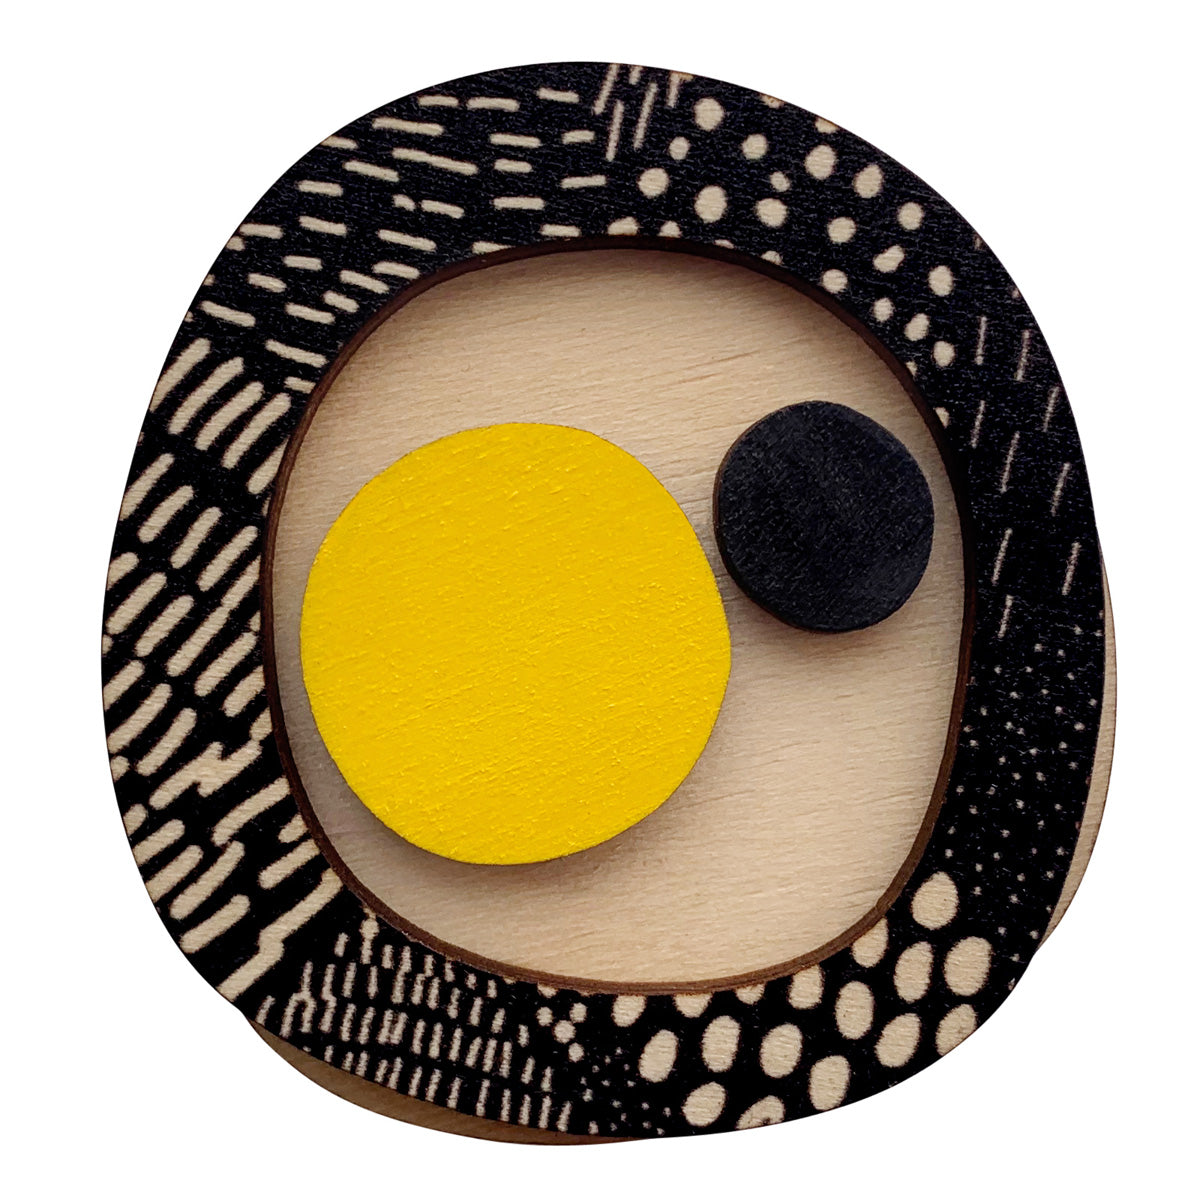 3 layer Brooch in yellow and Night Garden pattern